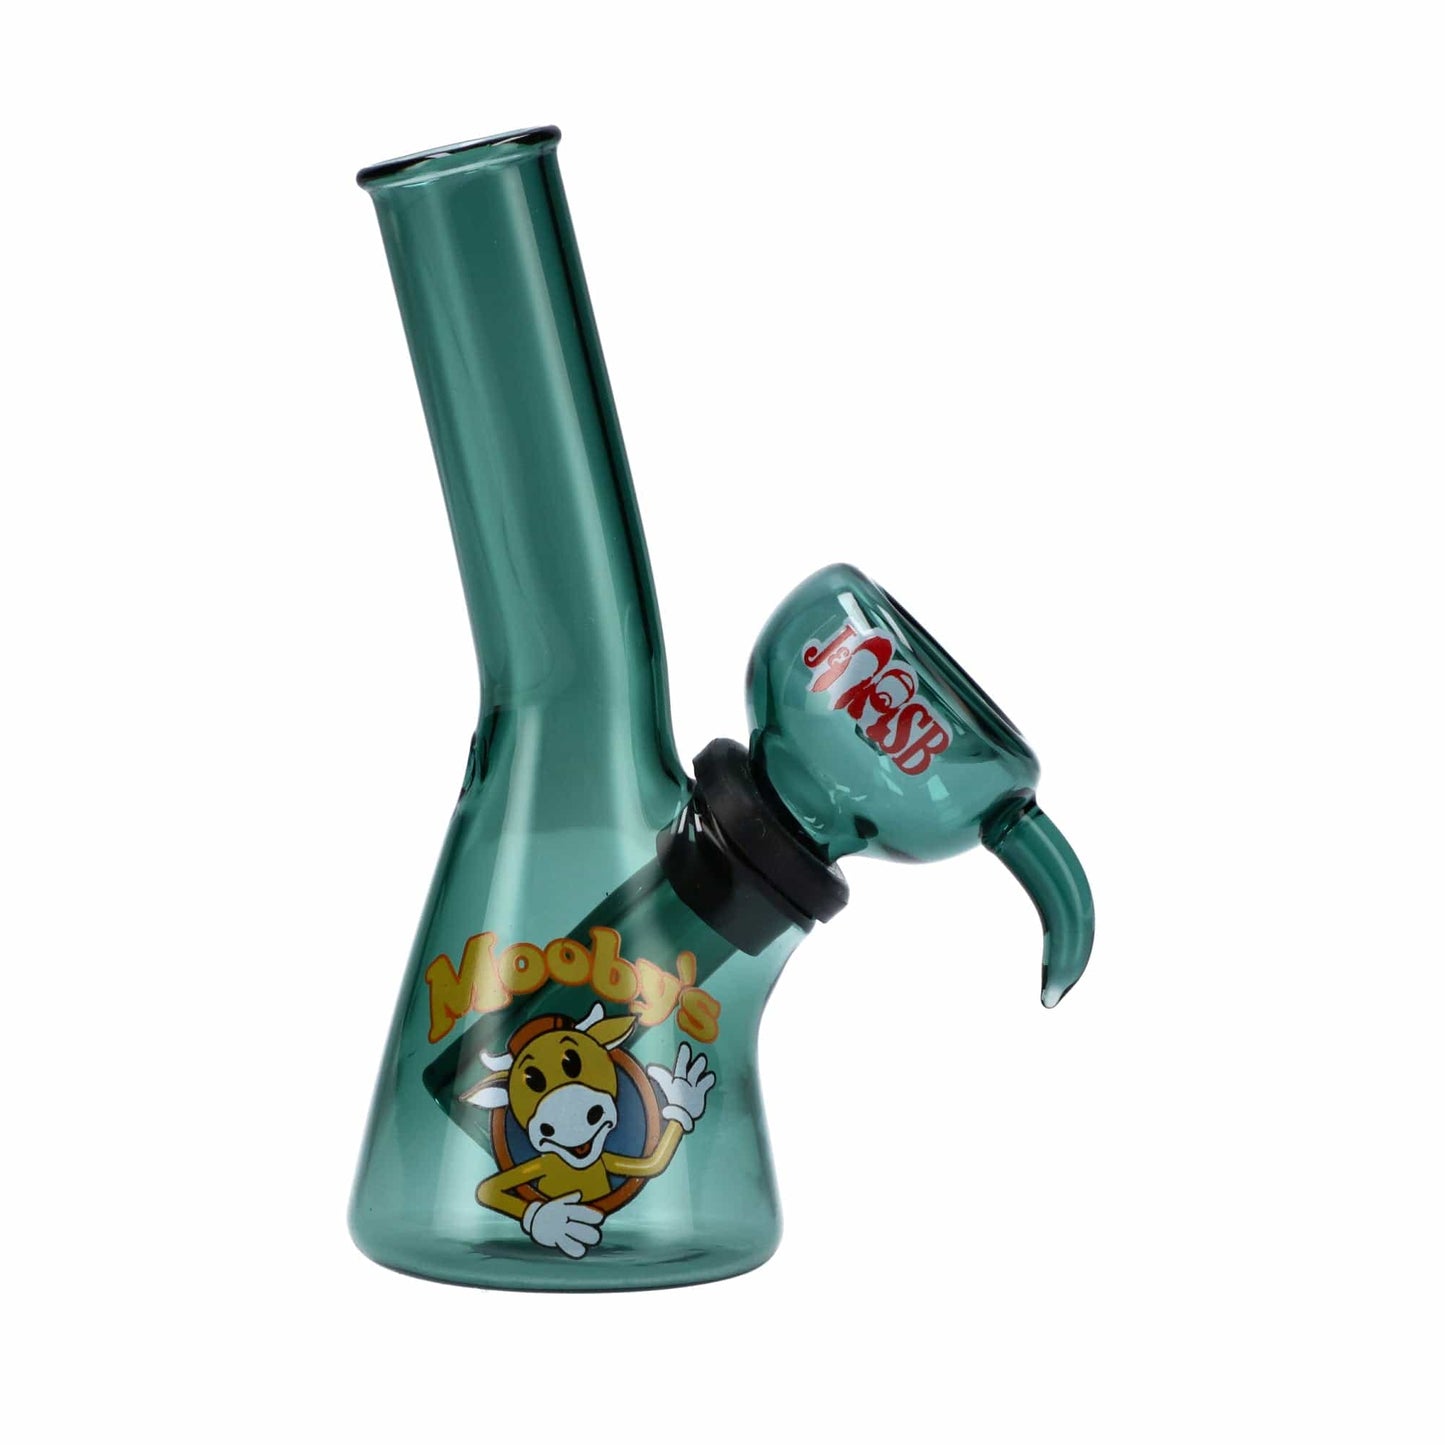 Jay and Silent Bob Bong 4" Mini Water Pipe - Mooby's Teal